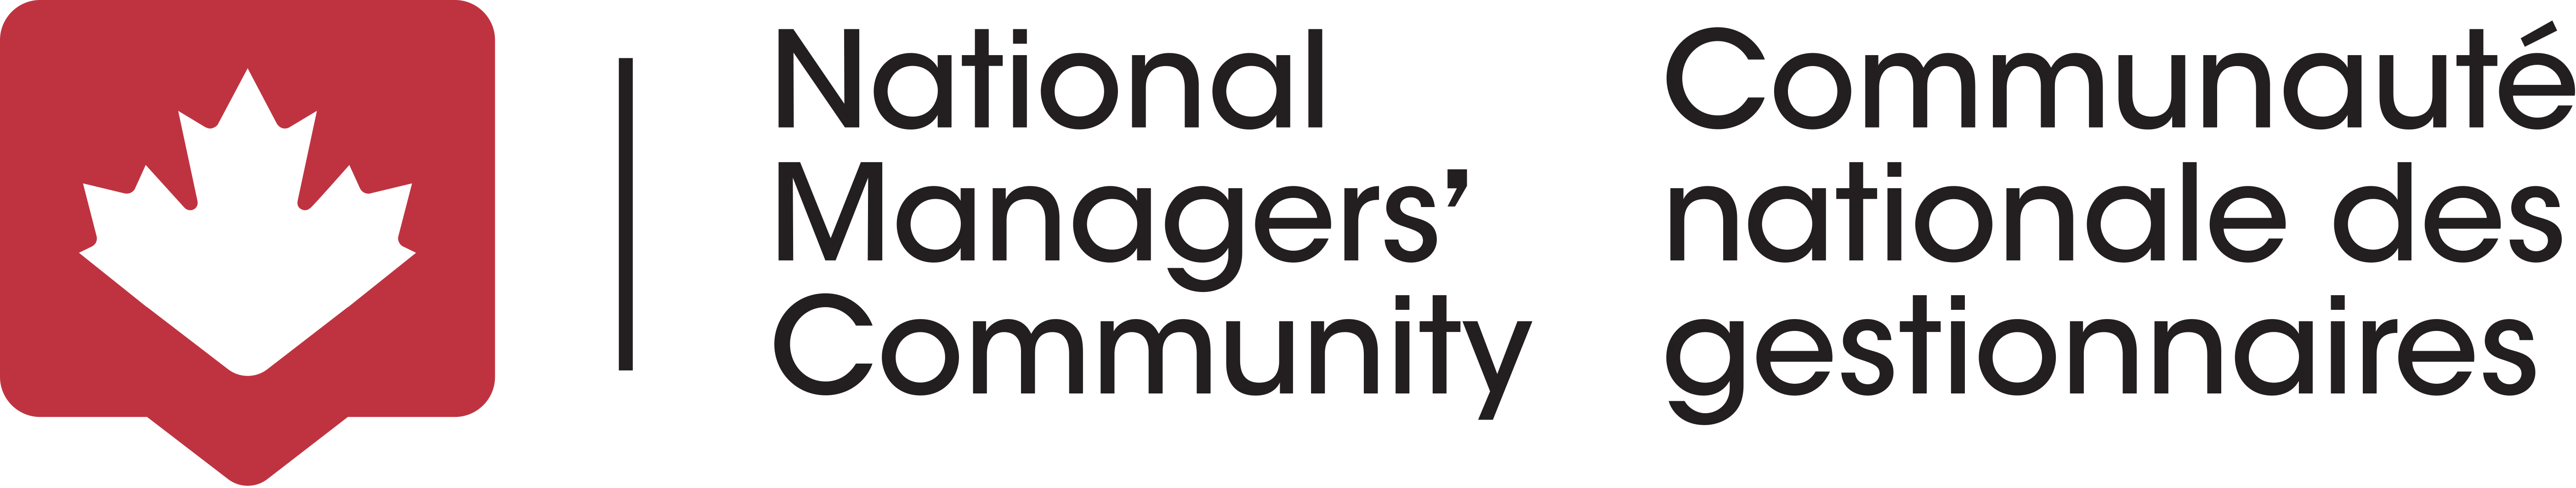 National Managers Community